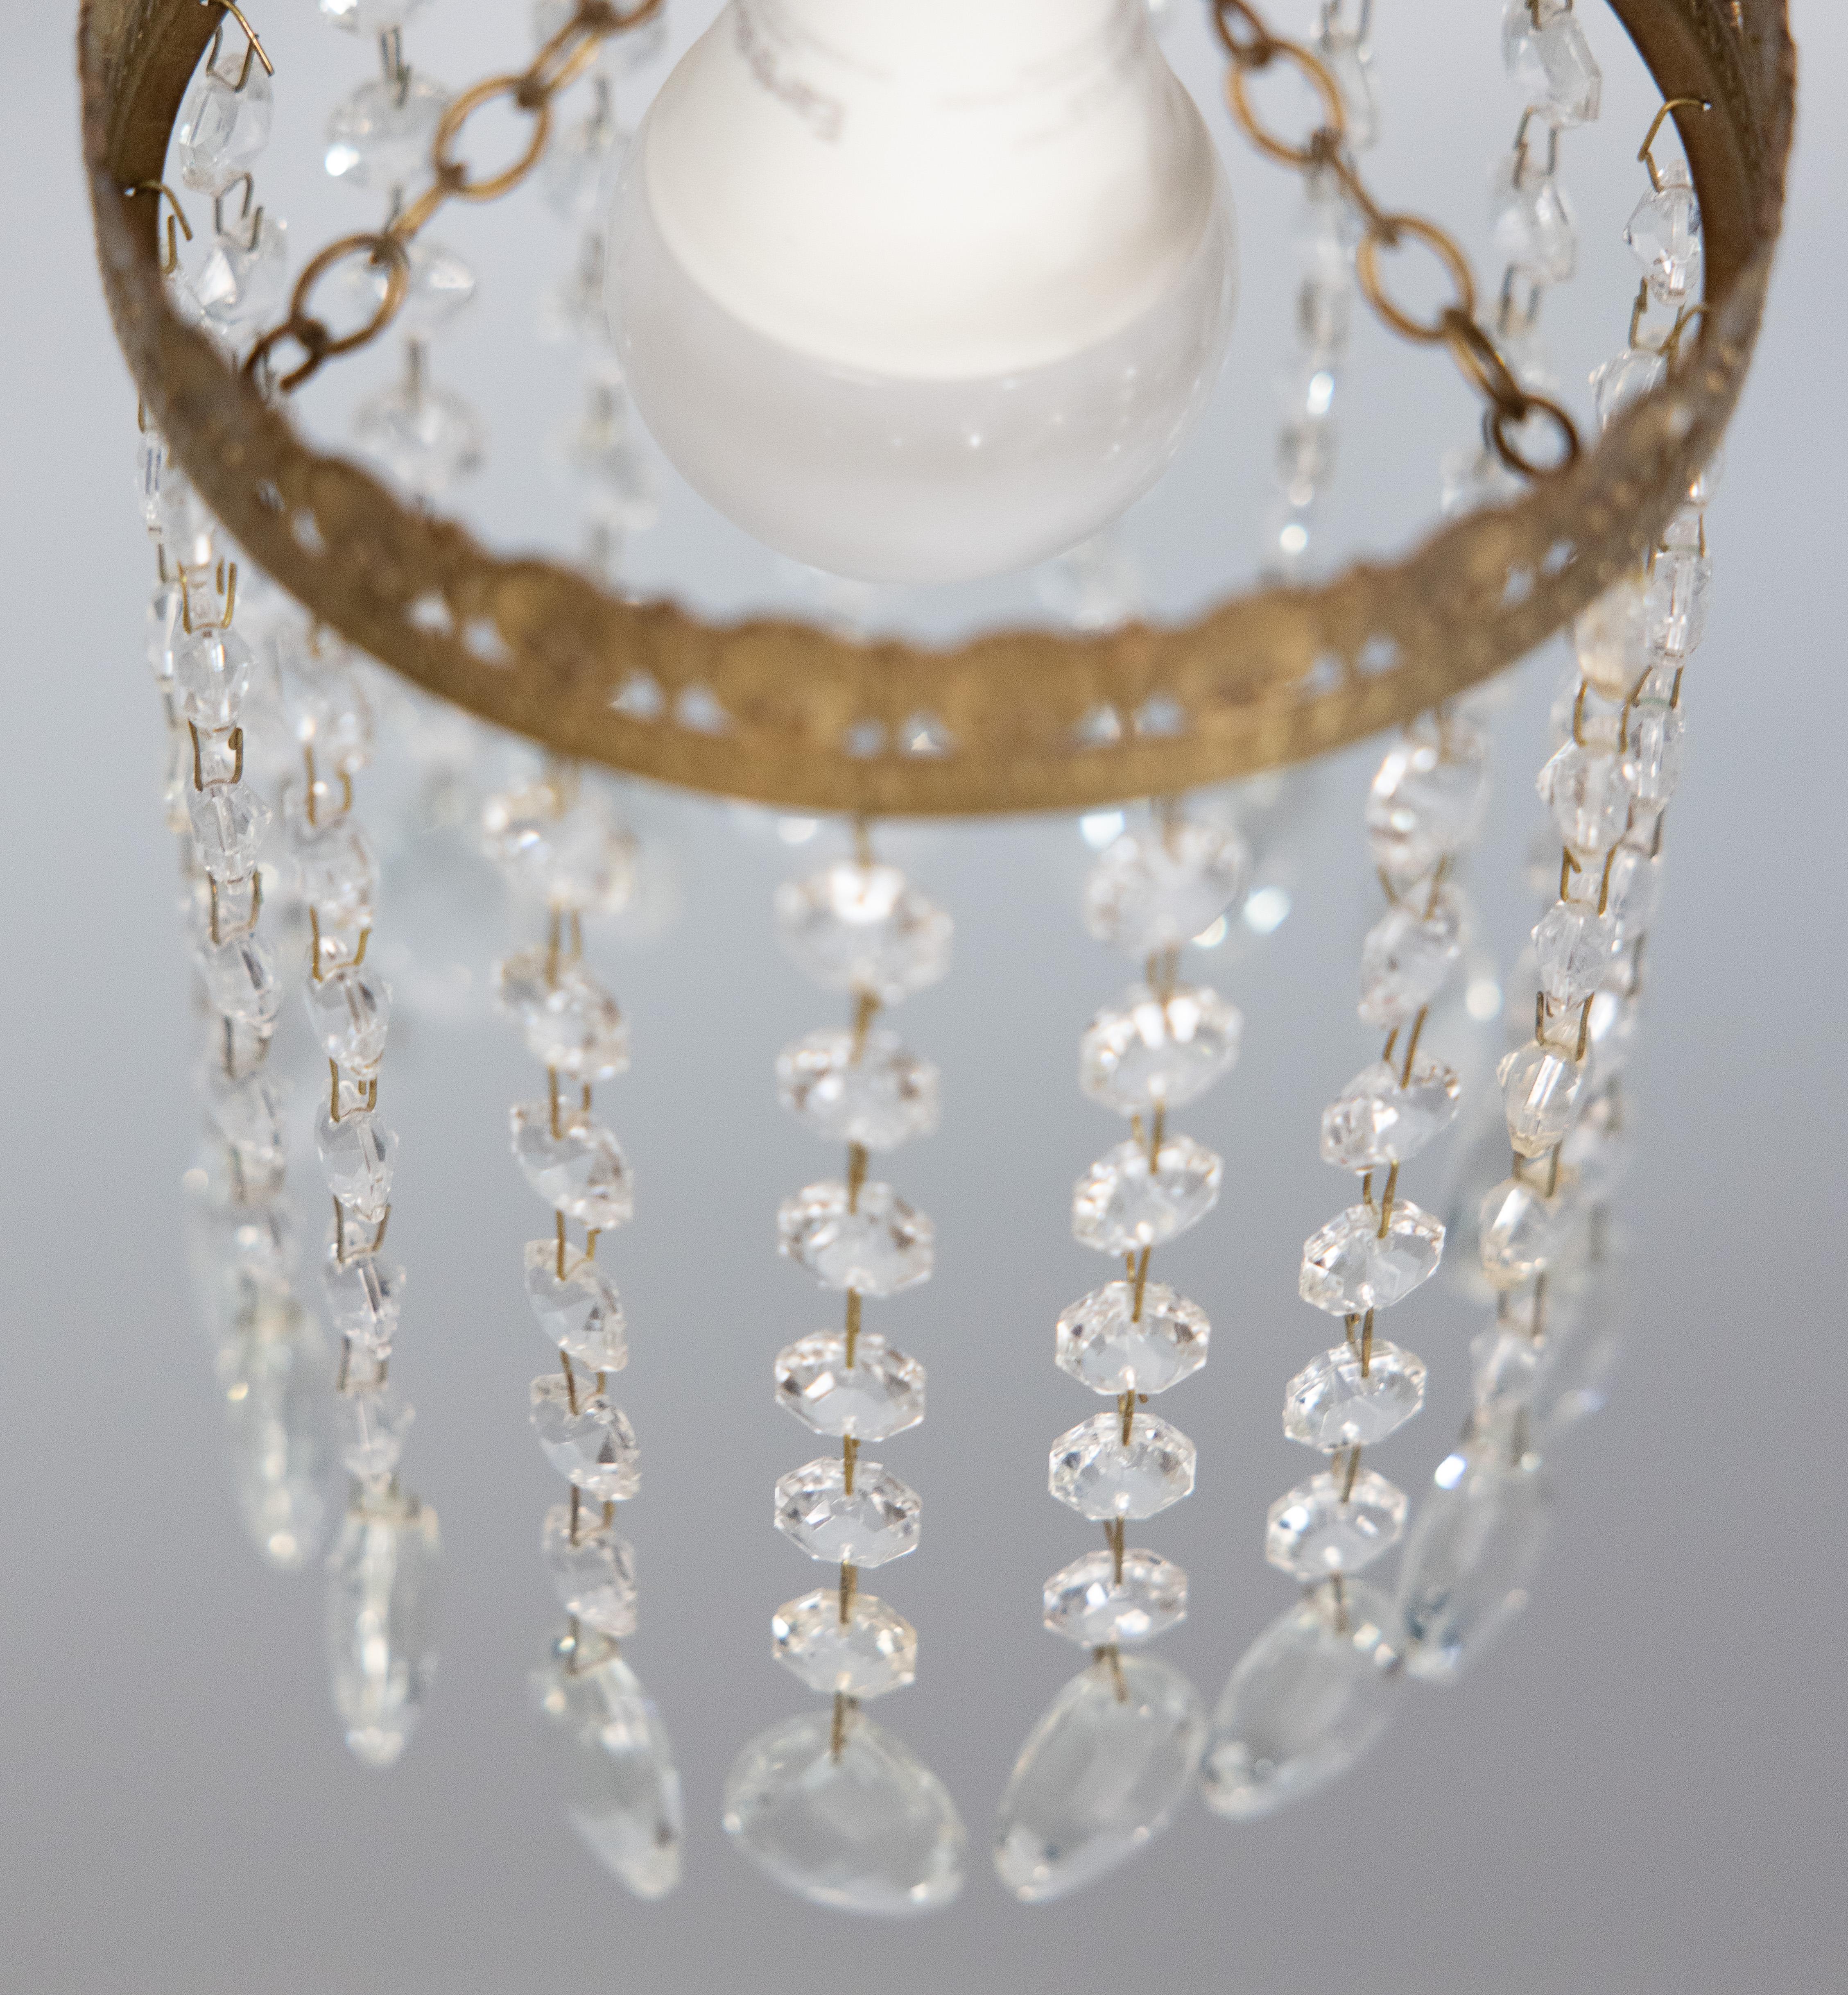 Early 20th Century Antique French Ormolu & Crystals Electrolier Chandelier Light Shade, circa 1920 For Sale